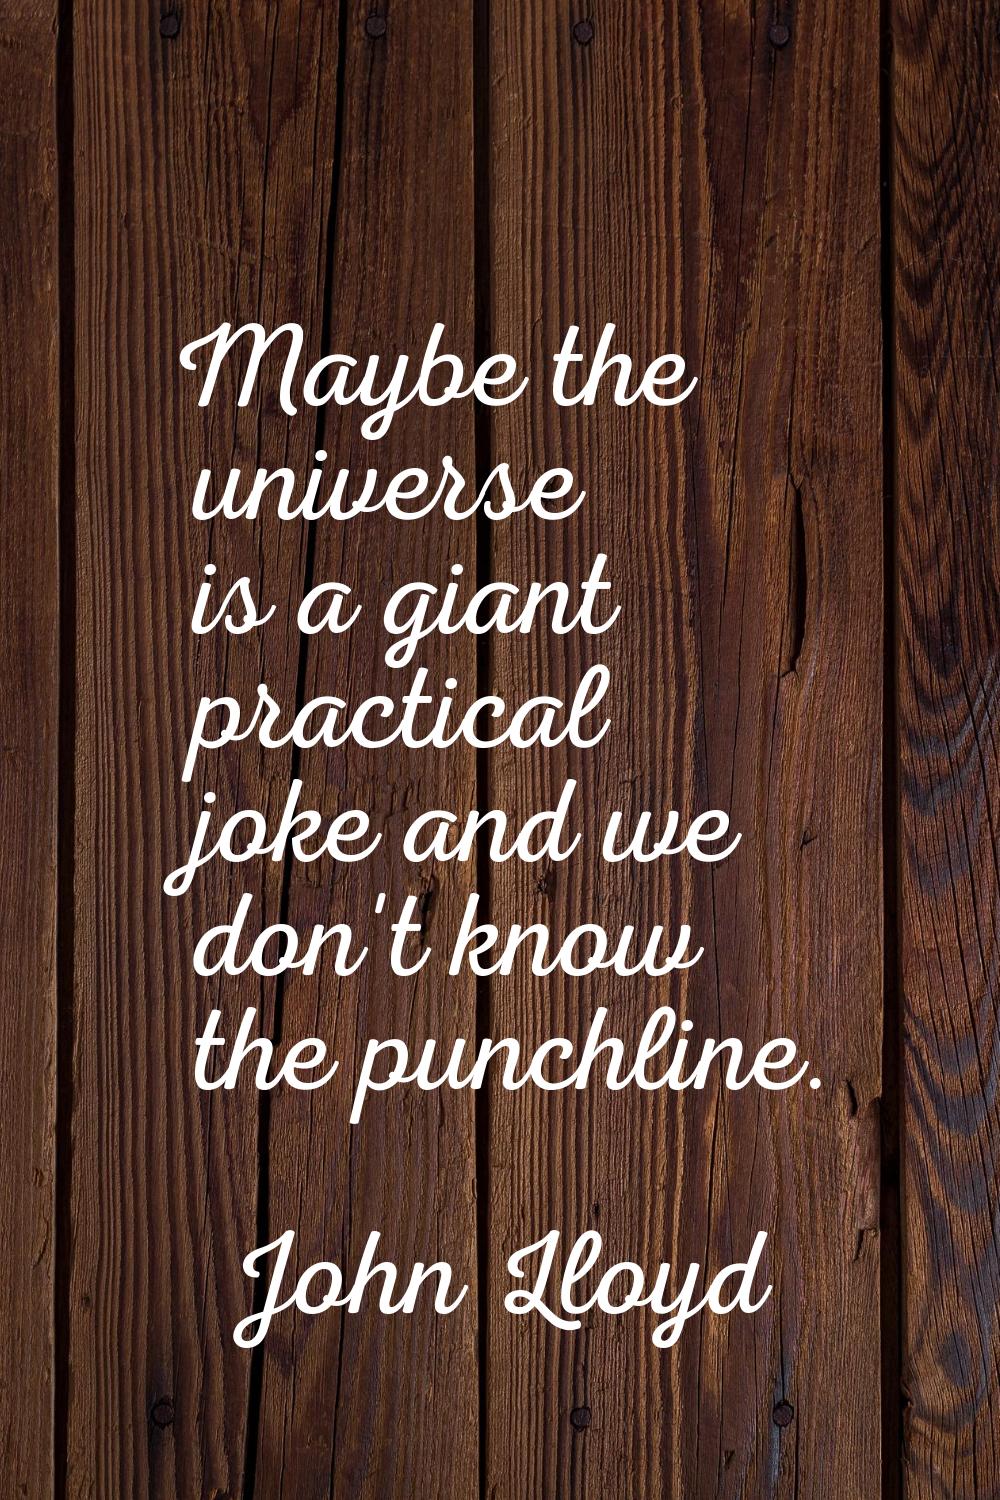 Maybe the universe is a giant practical joke and we don't know the punchline.